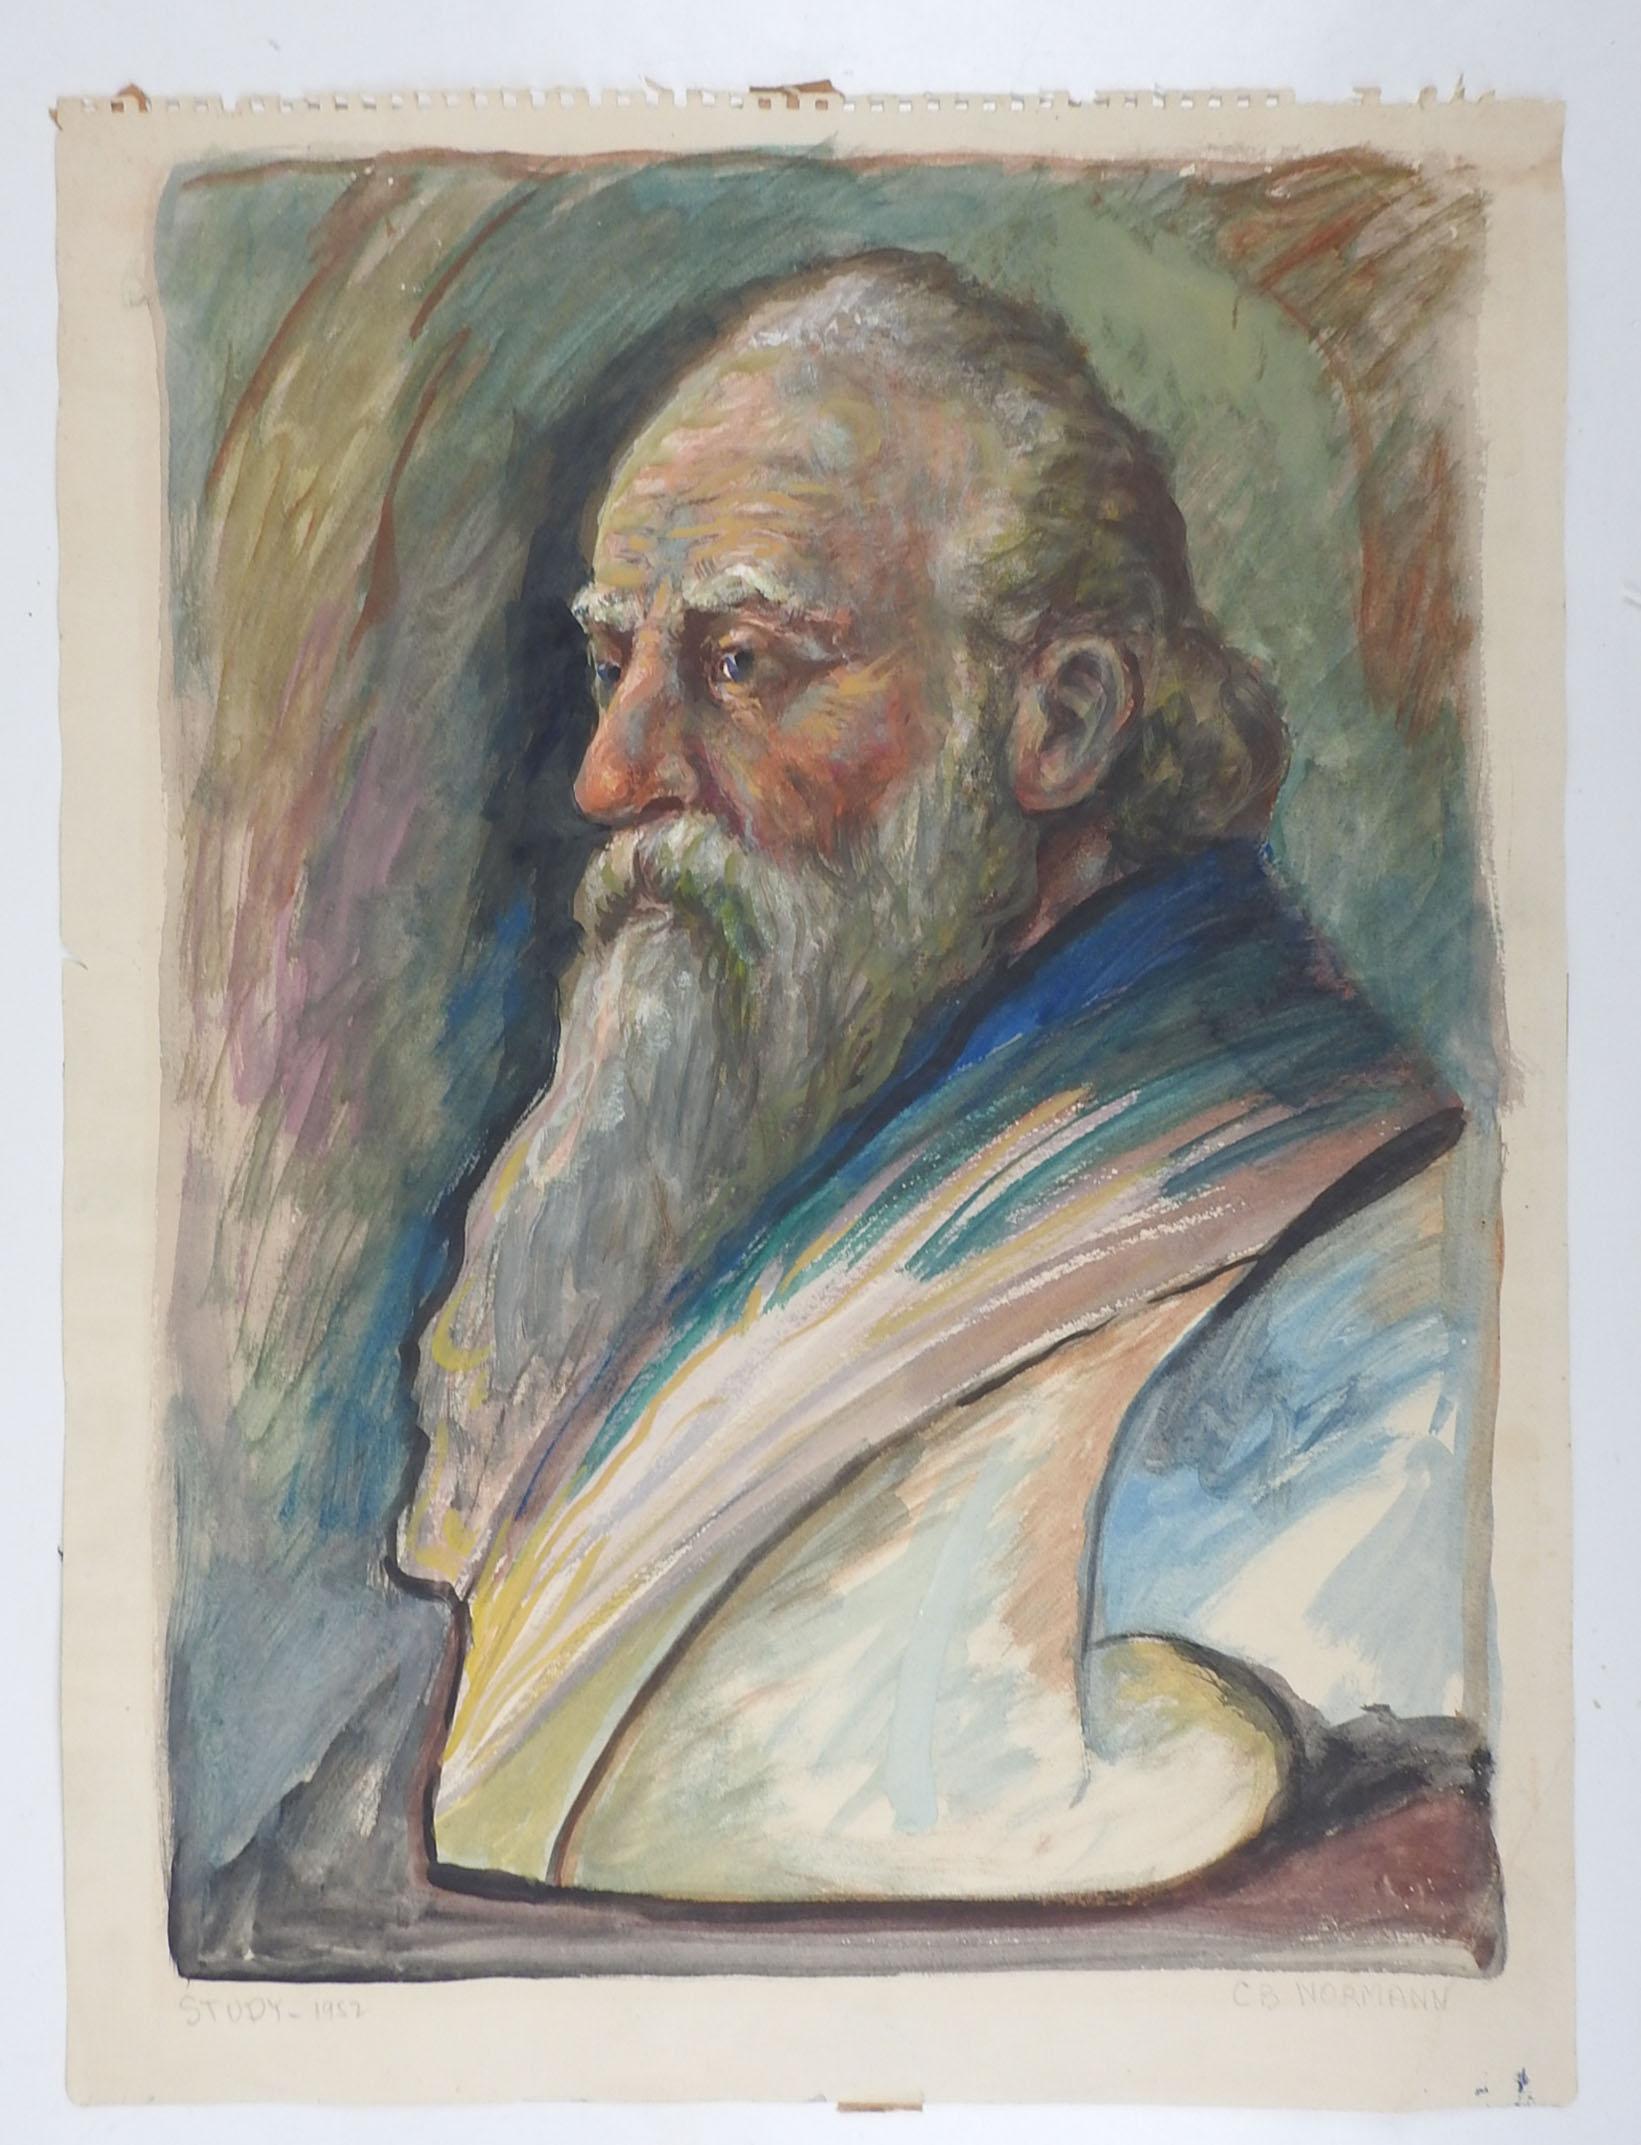 Vintage circa 1950s gouache on paper portrait painting by Charles Berkeley Normann (1903-1985) Norway/Texas. Likely a study of a bust sculpture. Signed in pencil lower right corner. Unframed, age toning, edge wear.